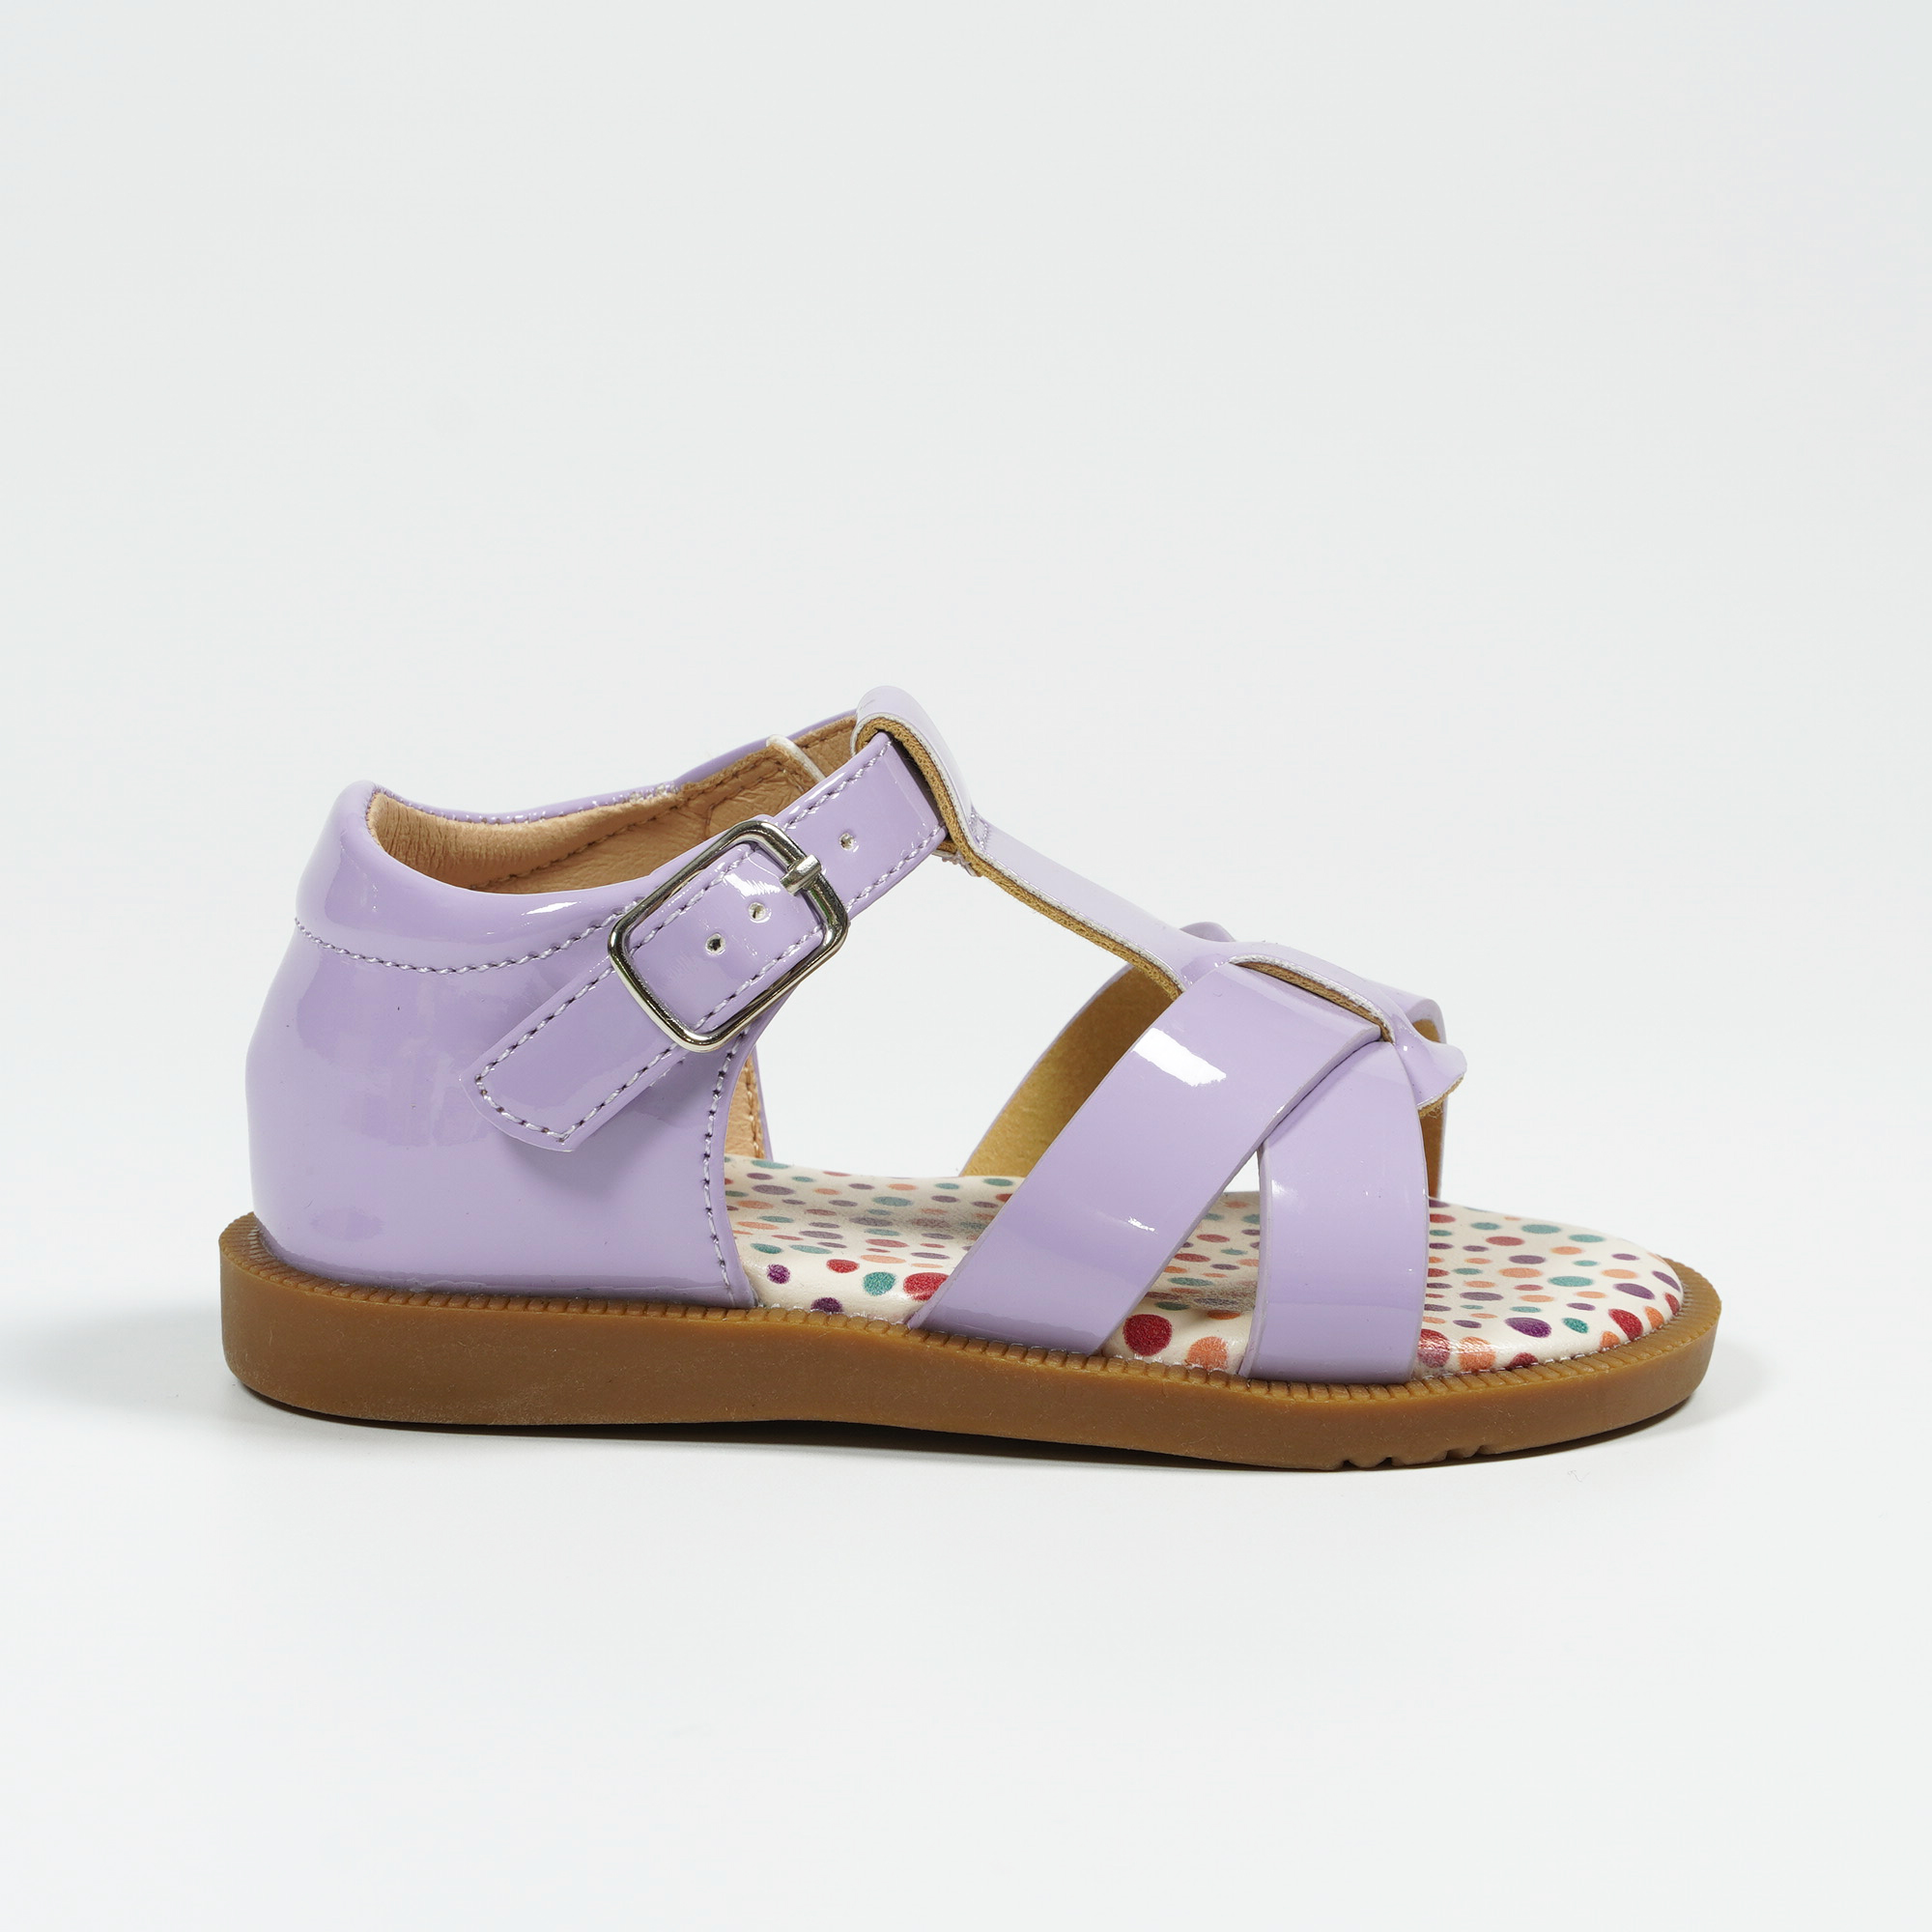 Nikoofly Lilac Cross Strap Buckle Sandals Yidaxing Colorful Polka-dot Summer Shoes